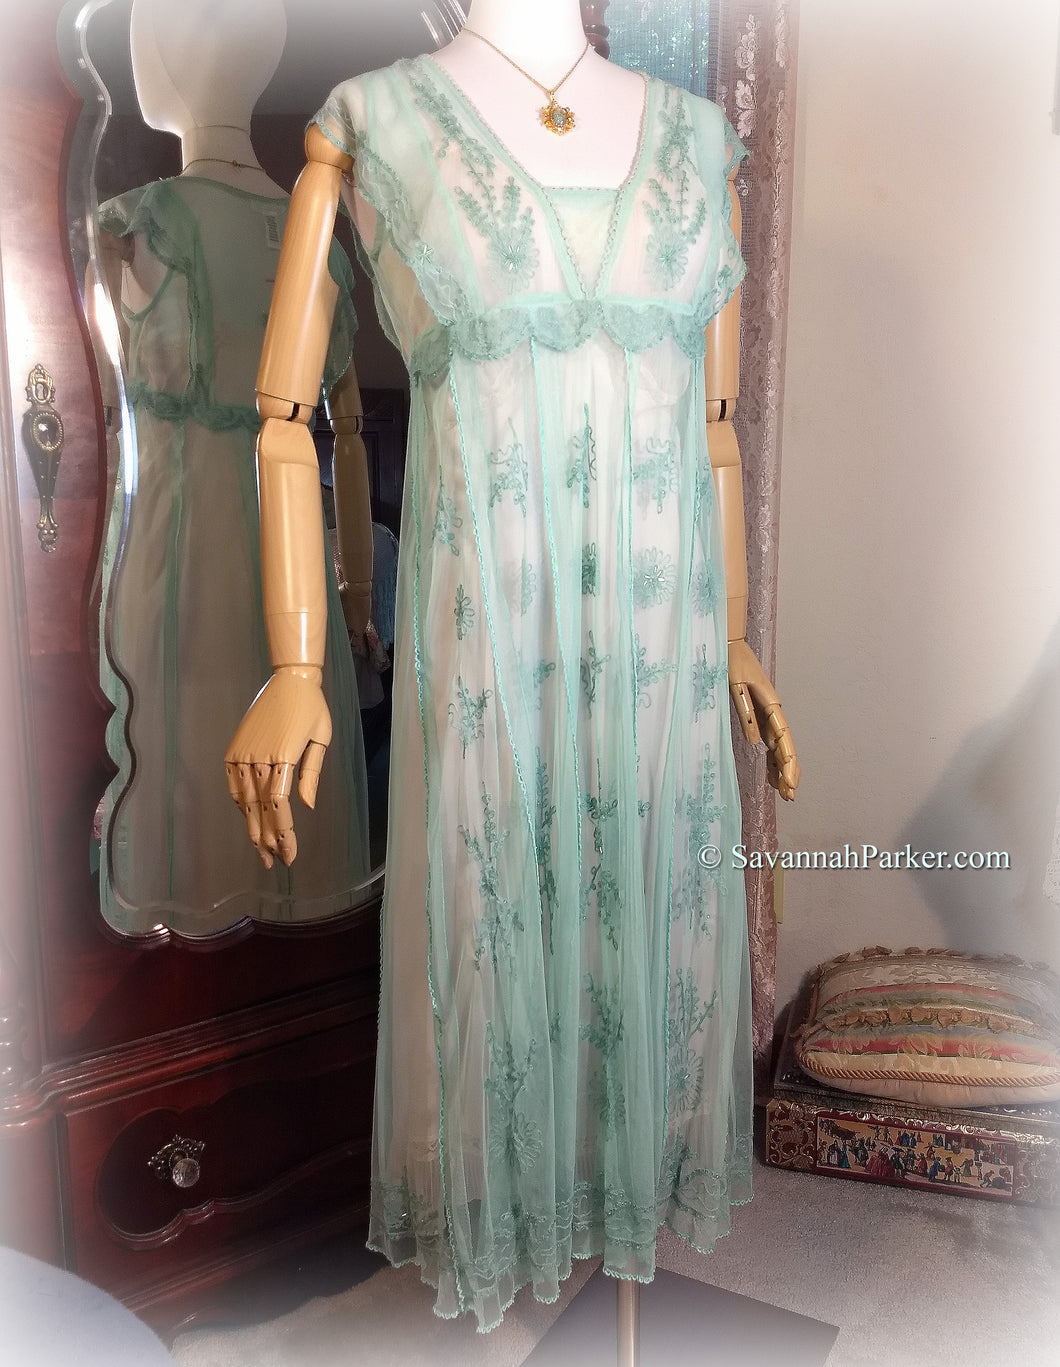 SOLD Beautiful Antique Inspired Sea Green Beaded Embroidered Lace Dress - New w Xtra Beads - Edwardian Style - Wedding or Garden Party Dress